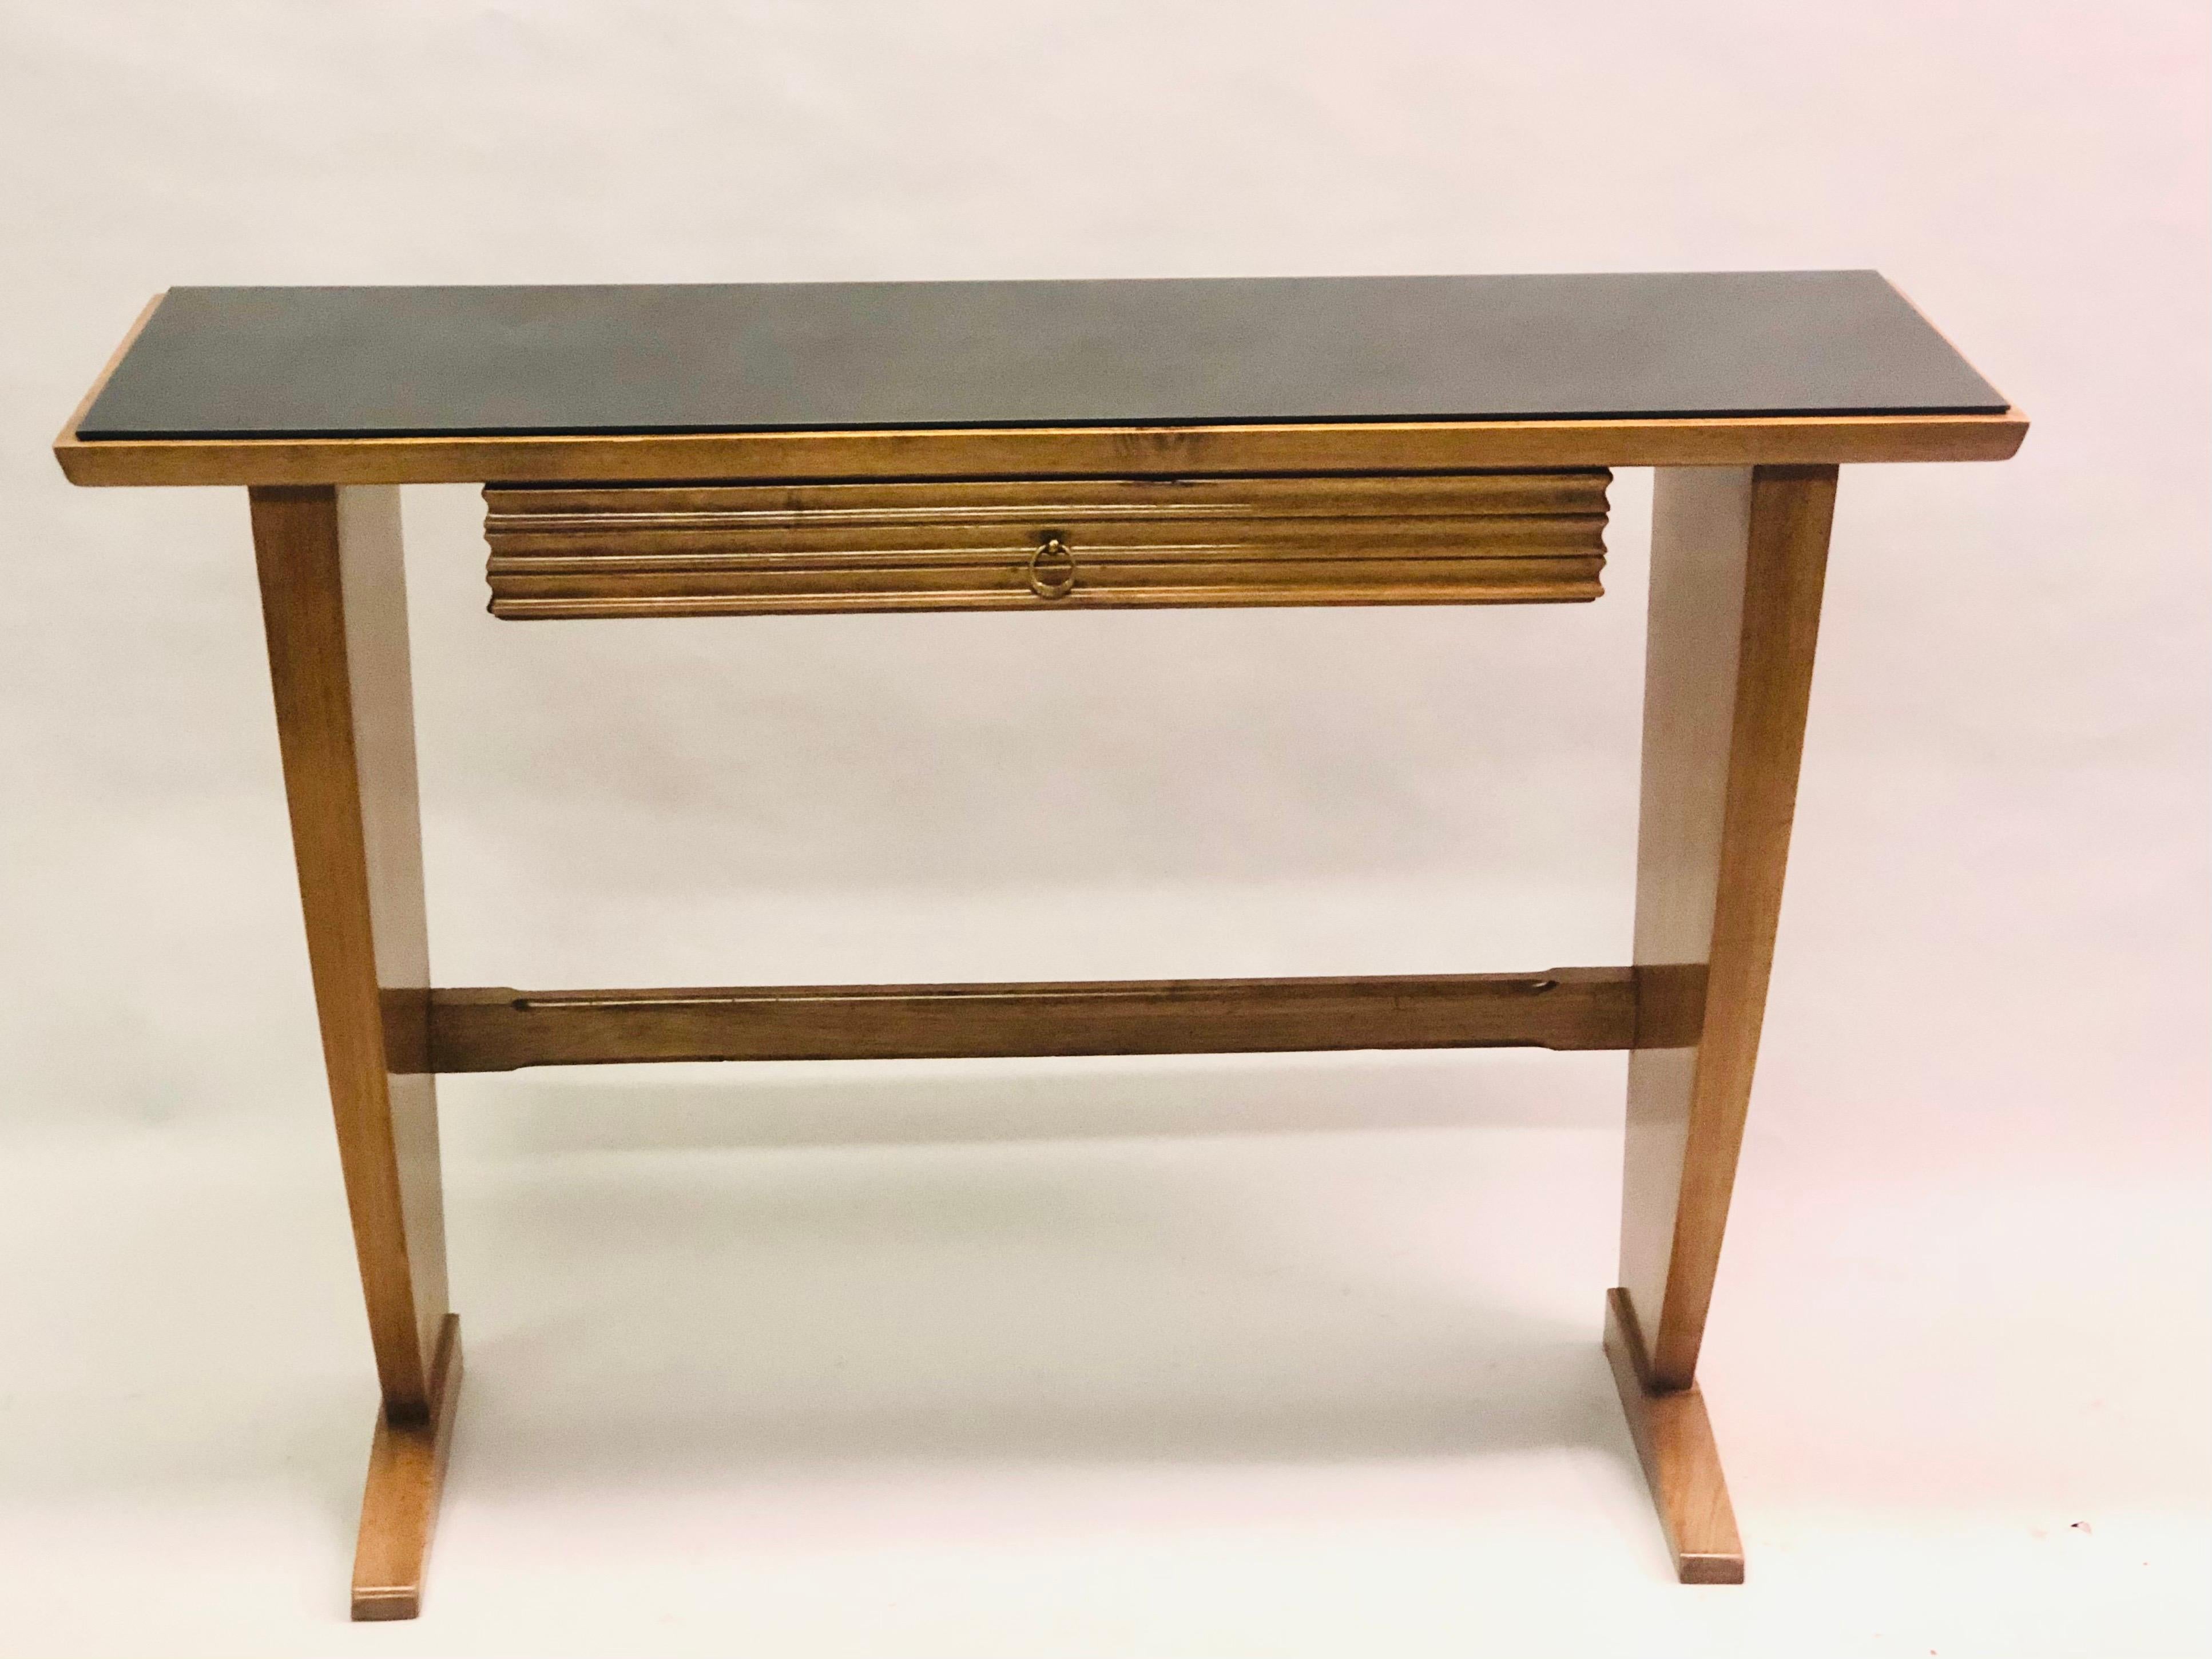 An exceptional Italian Mid-Century Modern Neoclassical Walnut Wood and Black Onyx glass console or writing table attributed to Paolo Buffa circa 1950. 

The console has a beautiful balance of materials with the light wood contrasting perfectly with